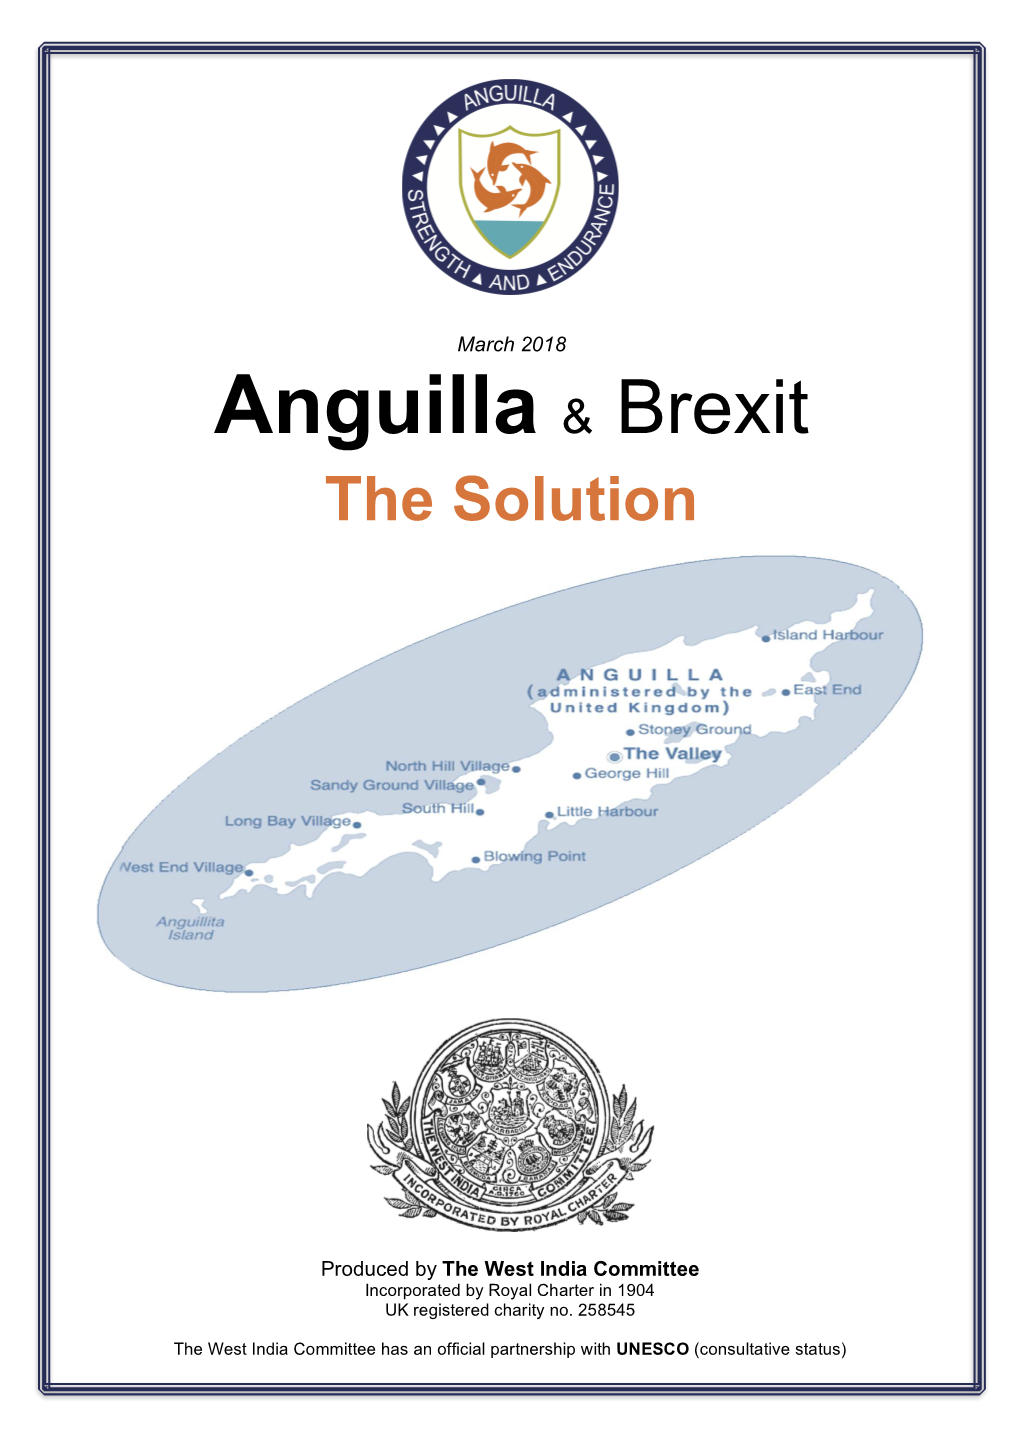 Anguilla and Brexit